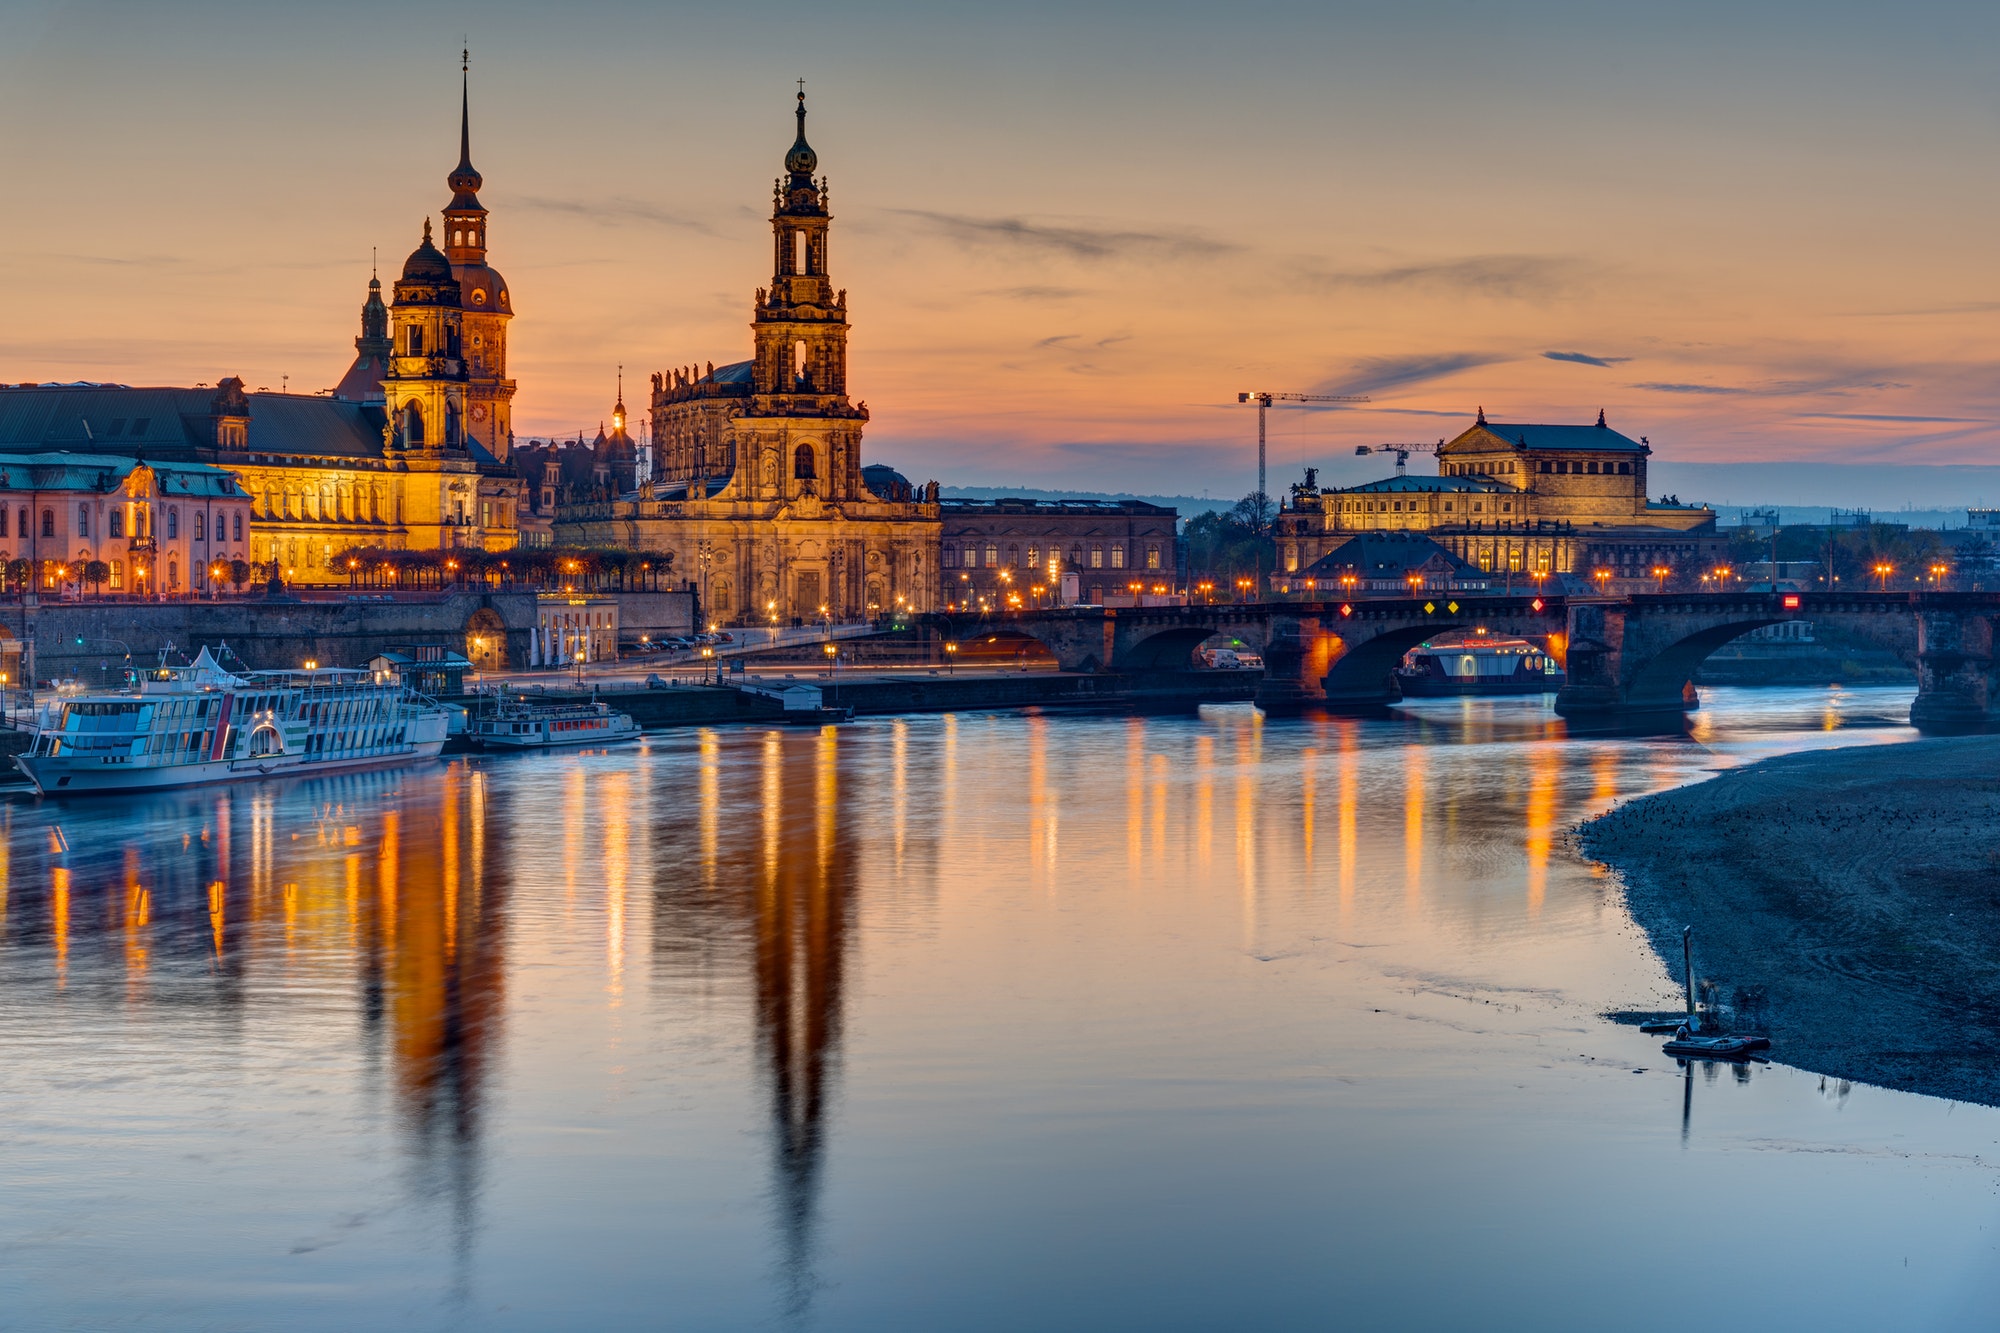 Sunset at the historic center of Dresden